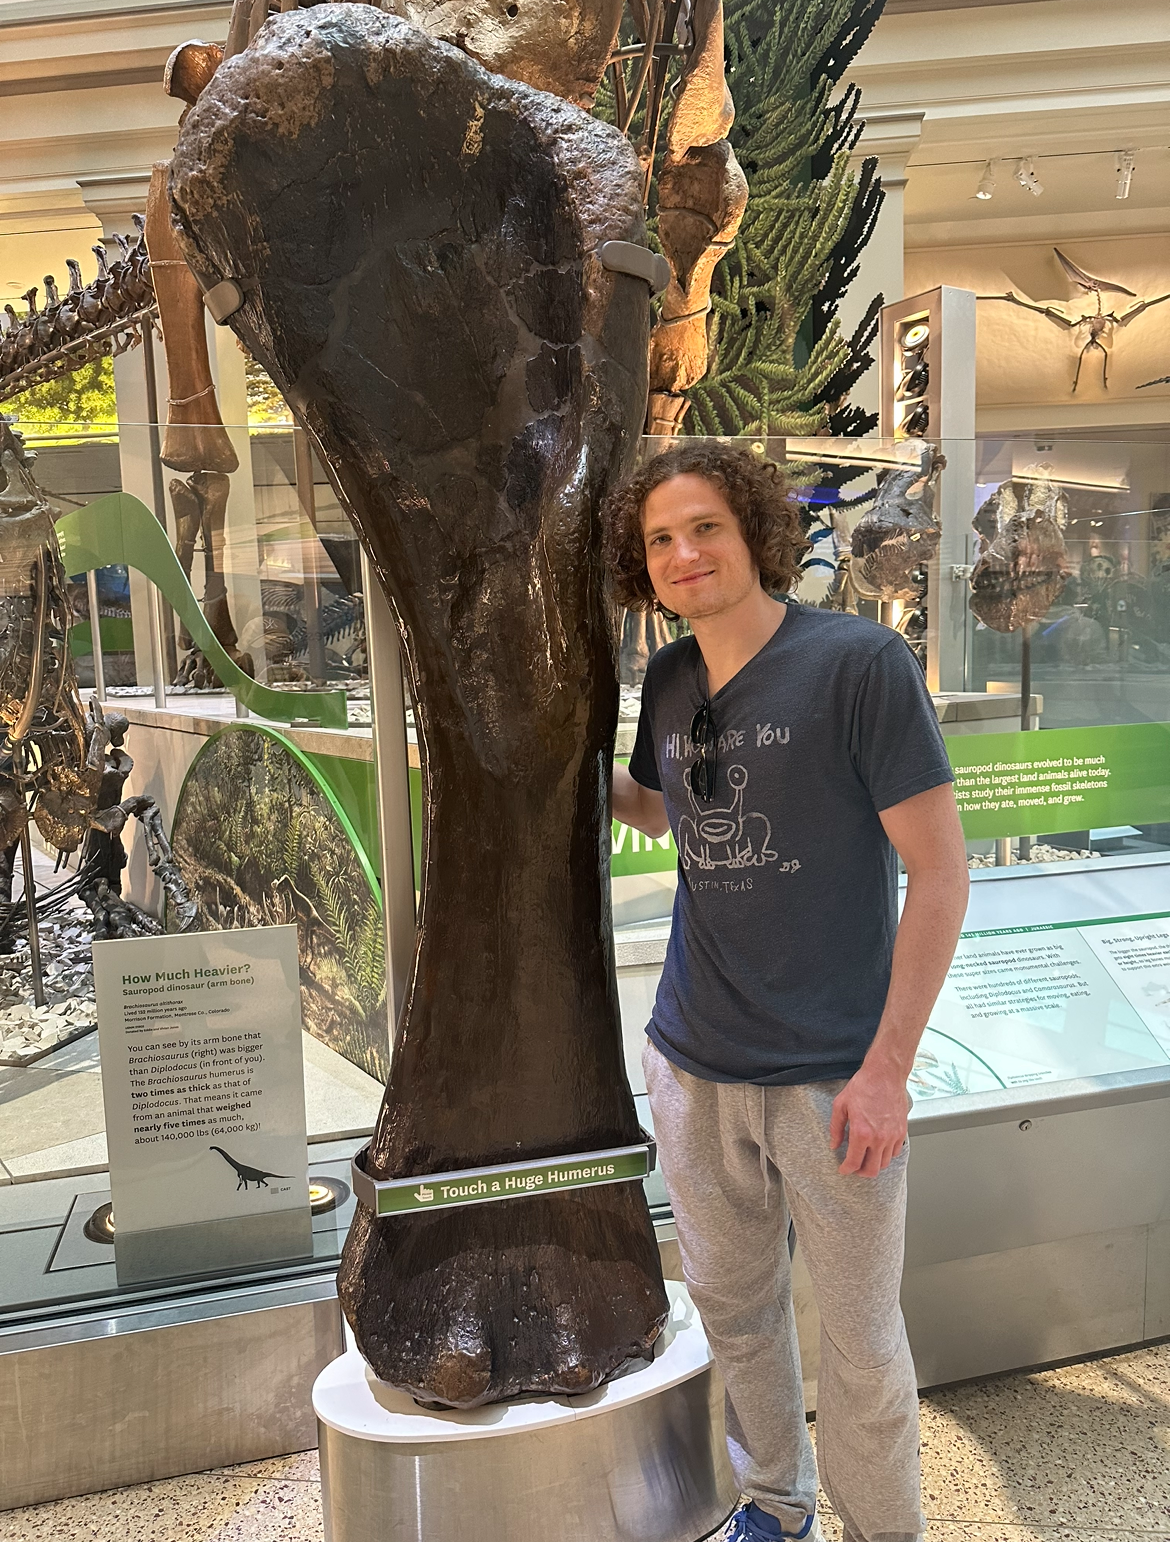 A person standing next to a large dinosaur skeleton

Description automatically generated